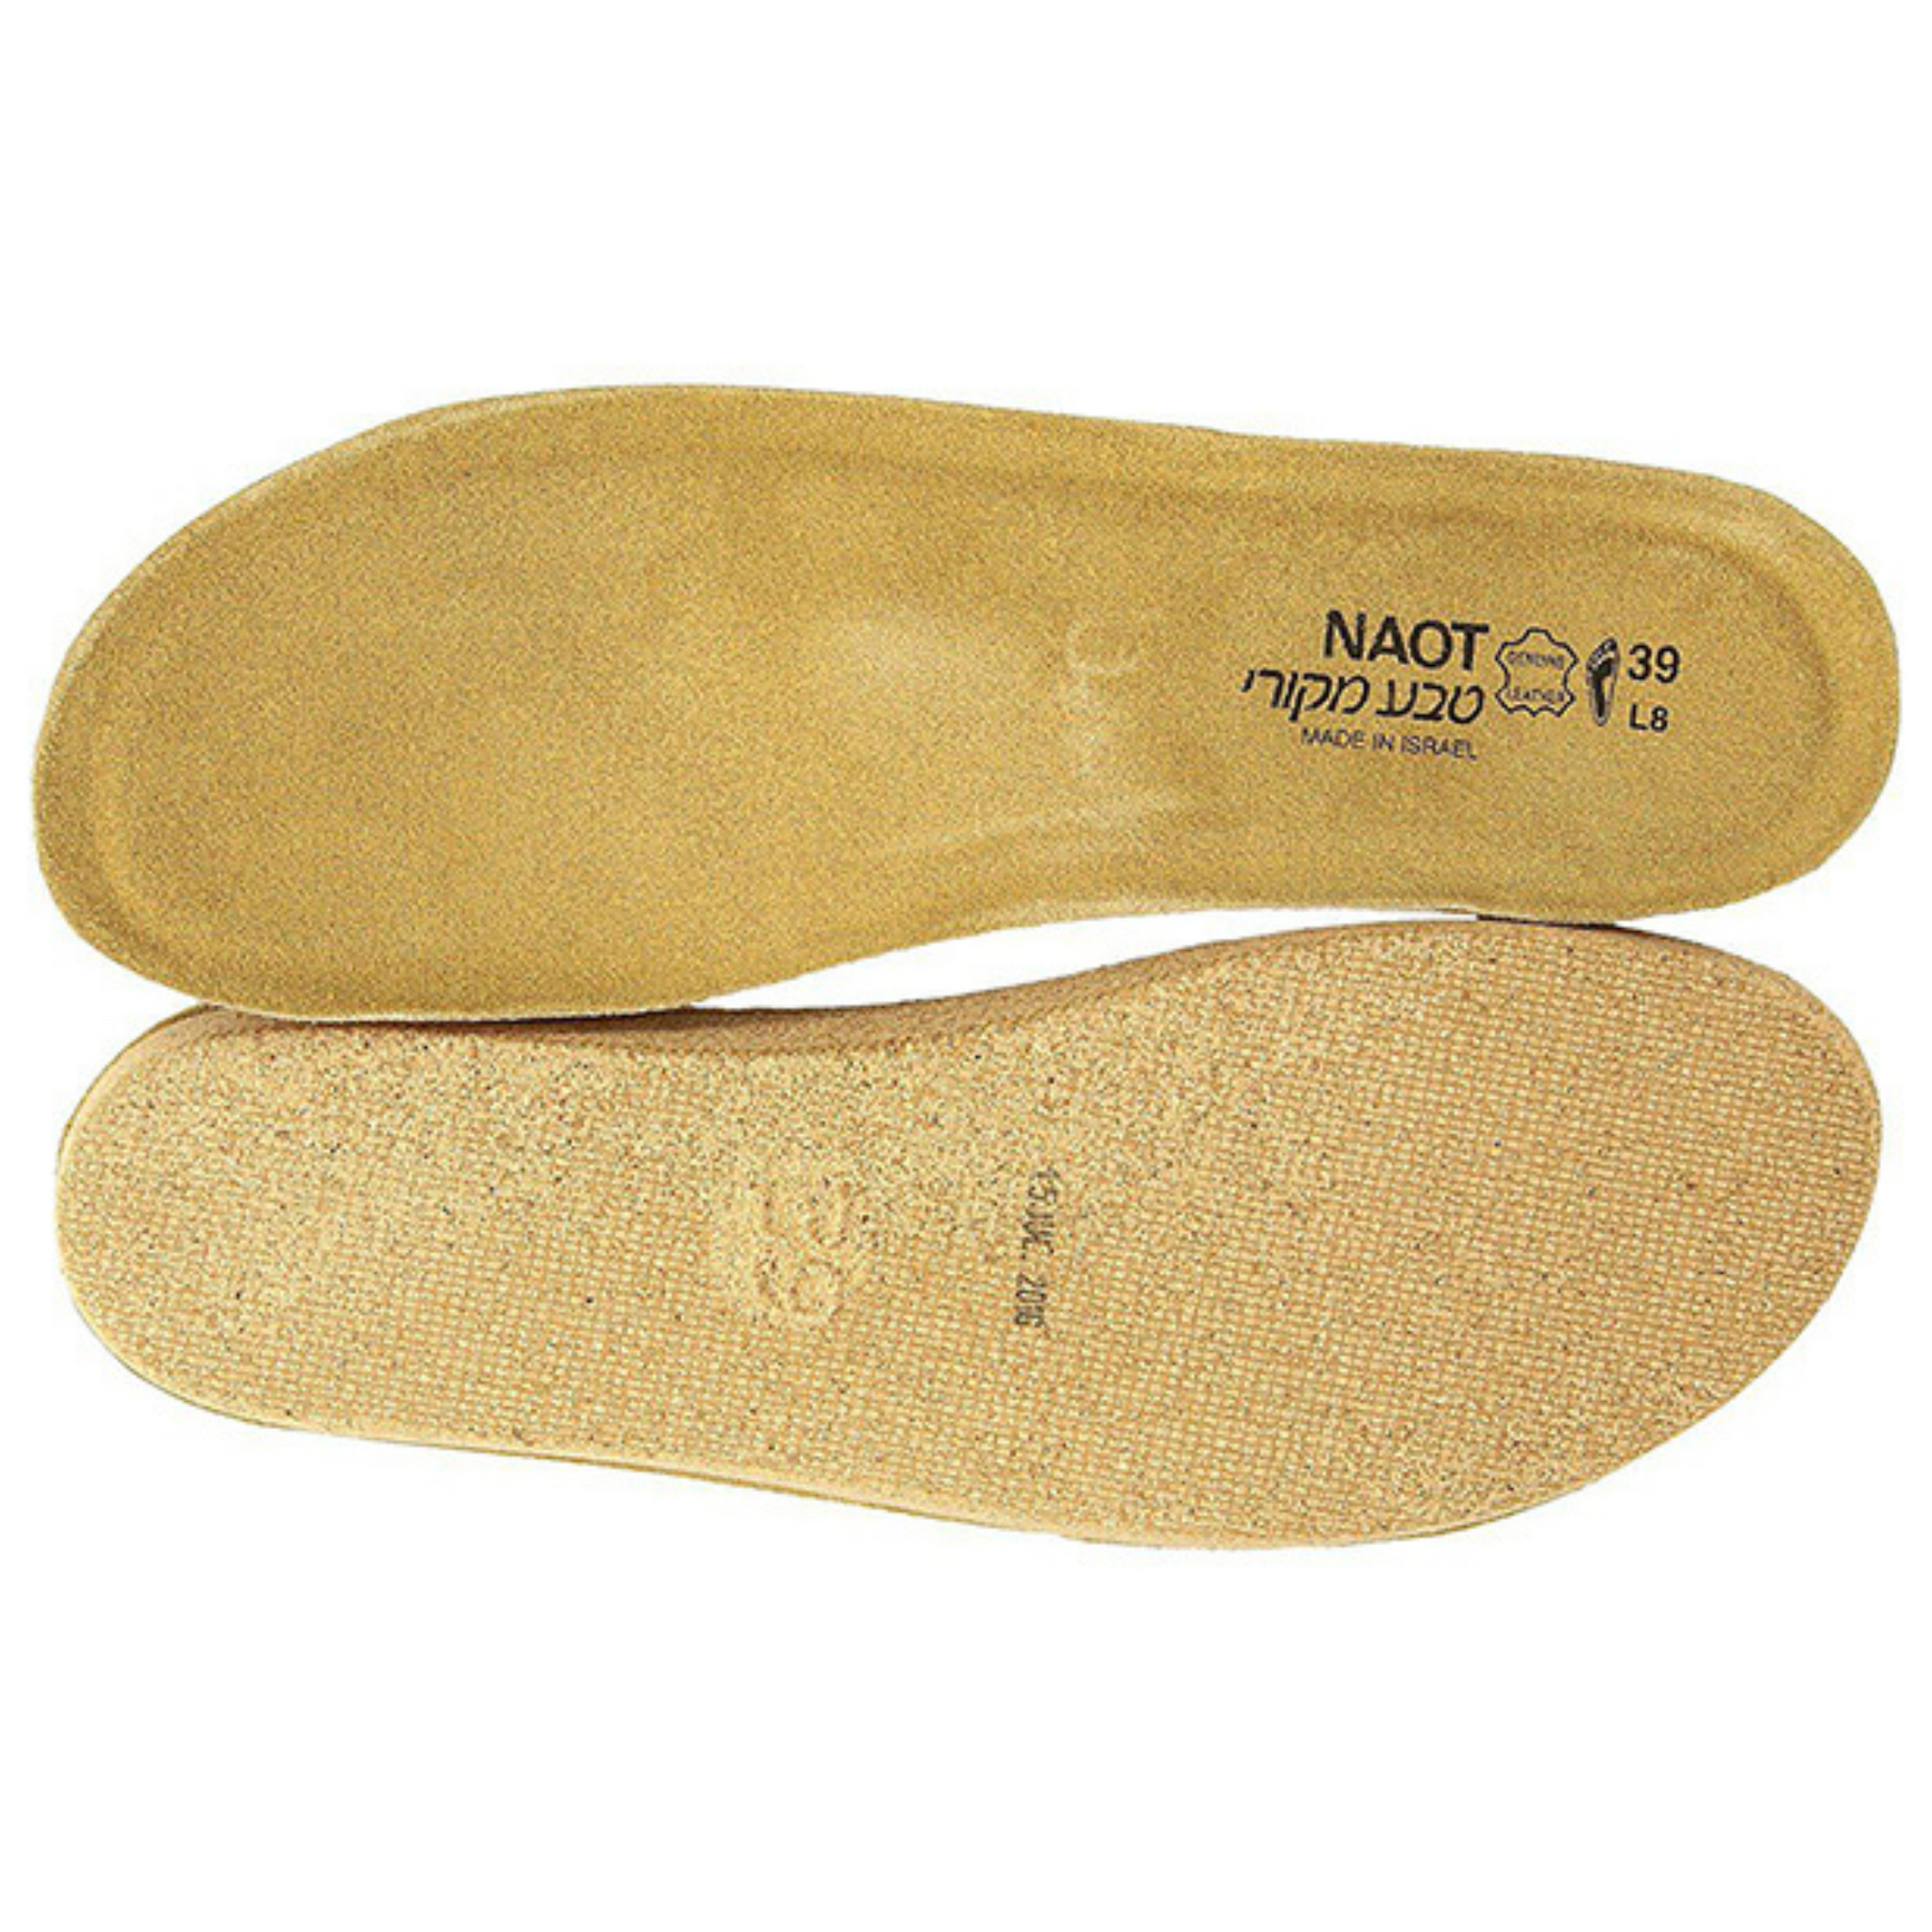 A photo of the cork insole, showing eachside. 